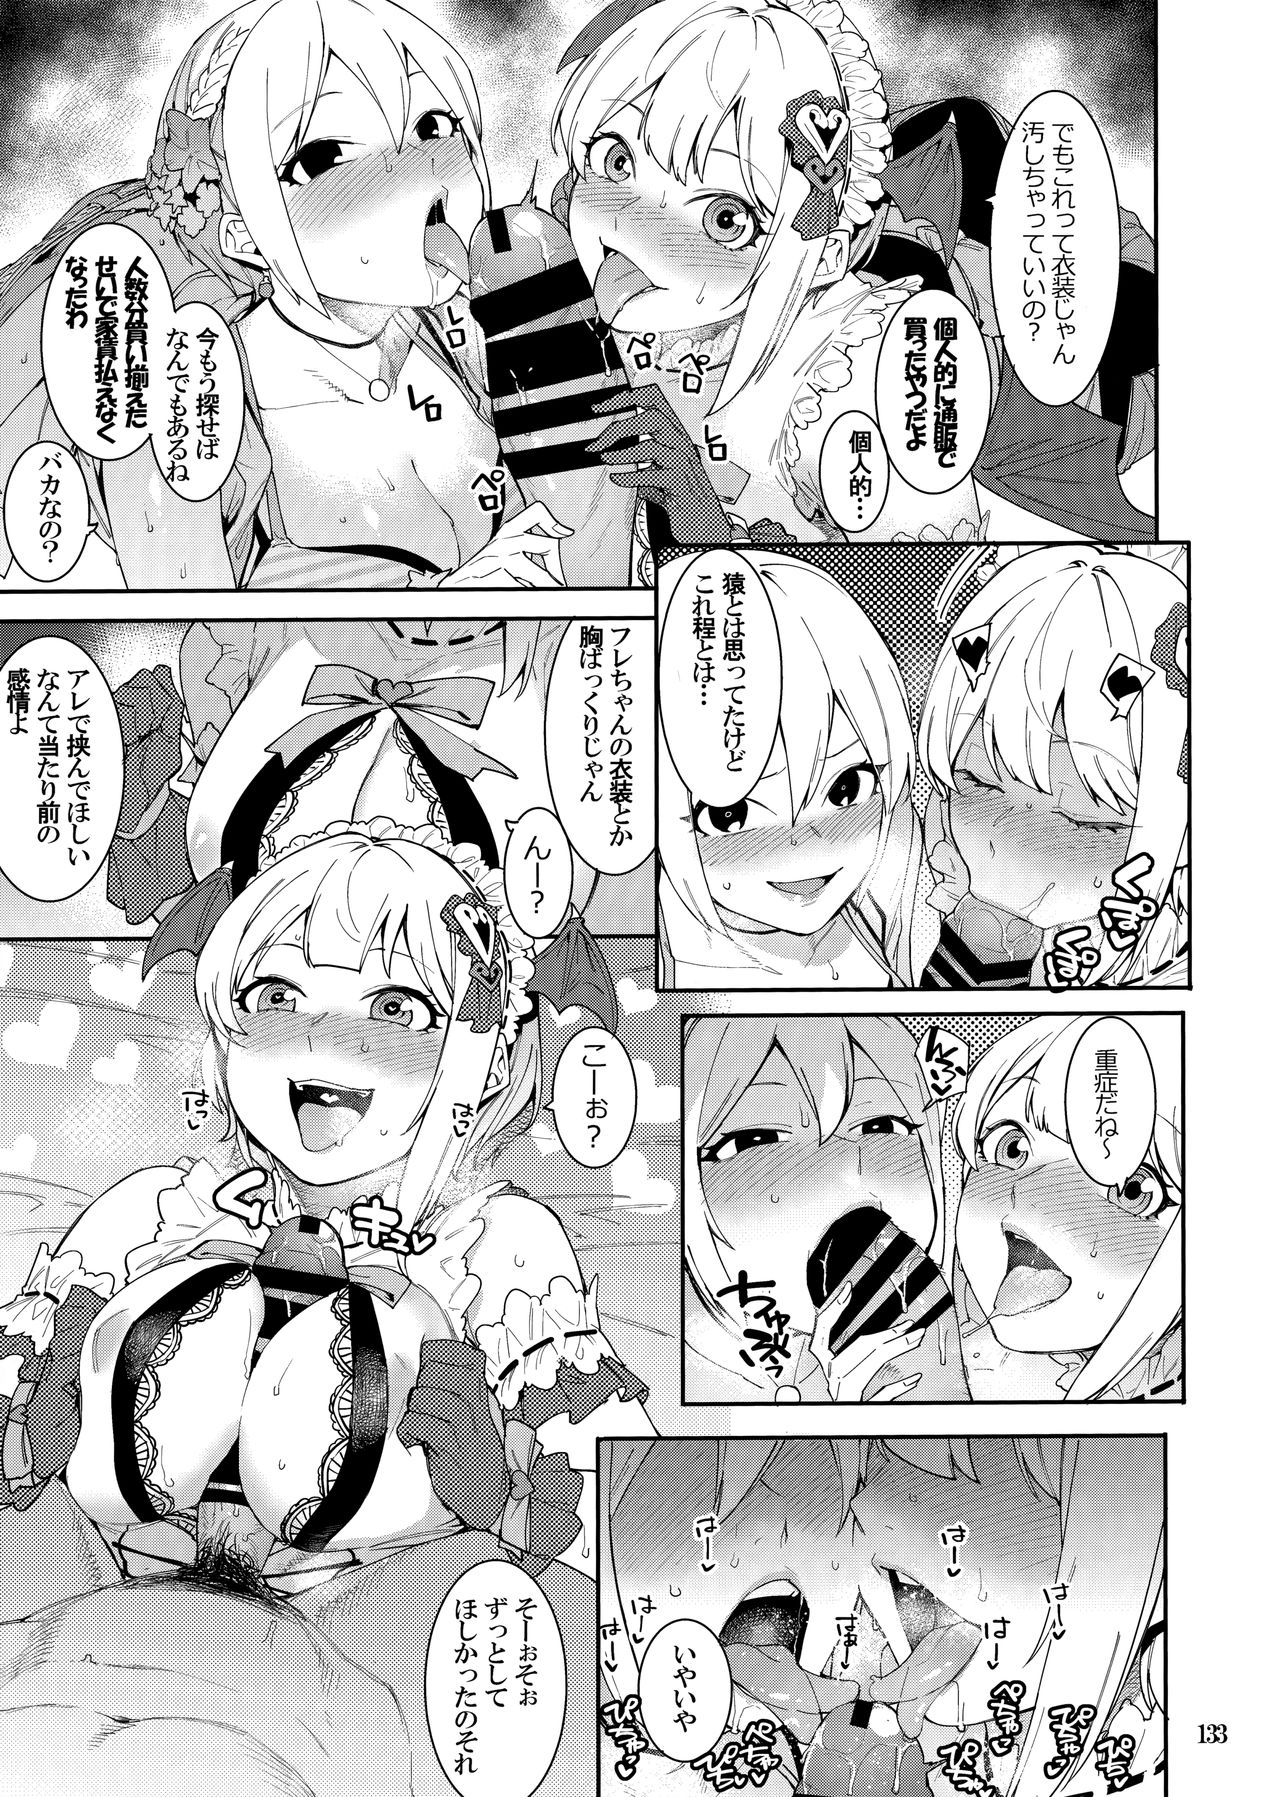 (C96) [DogStyle (Menea the Dog)] LipSync (THE IDOLM@STER CINDERELLA GIRLS) [Incomplete] page 7 full